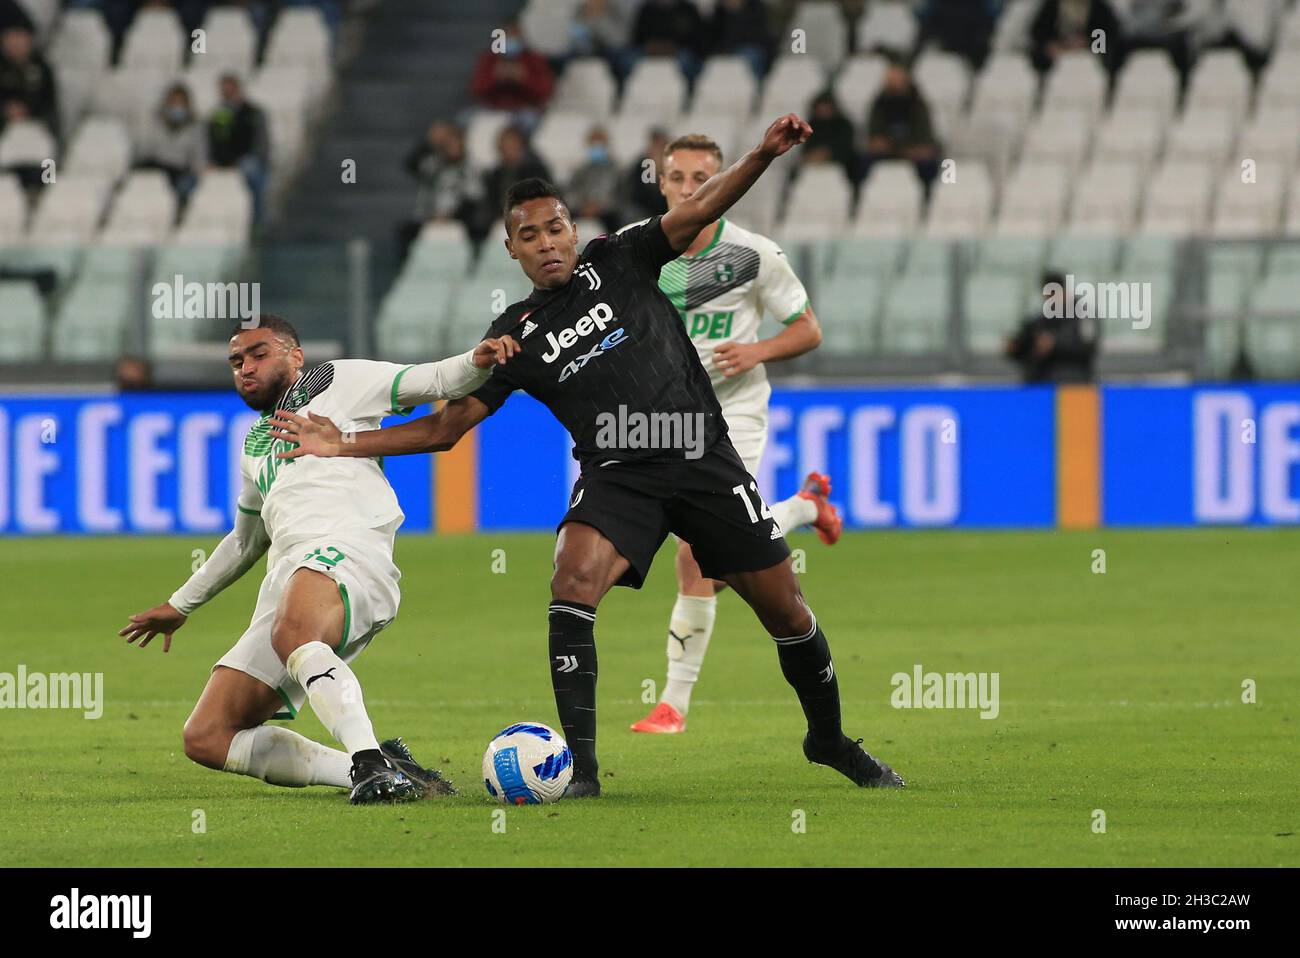 Turin, Italy. 27th Oct, 2021. Gregoire Defrel (US Sassuolo) vs Alex Sandro Lobo Silva (Juventus FC) during Juventus FC vs US Sassuolo, Italian soccer Serie A match in Turin, Italy, October 27 2021 Credit: Independent Photo Agency/Alamy Live News Stock Photo